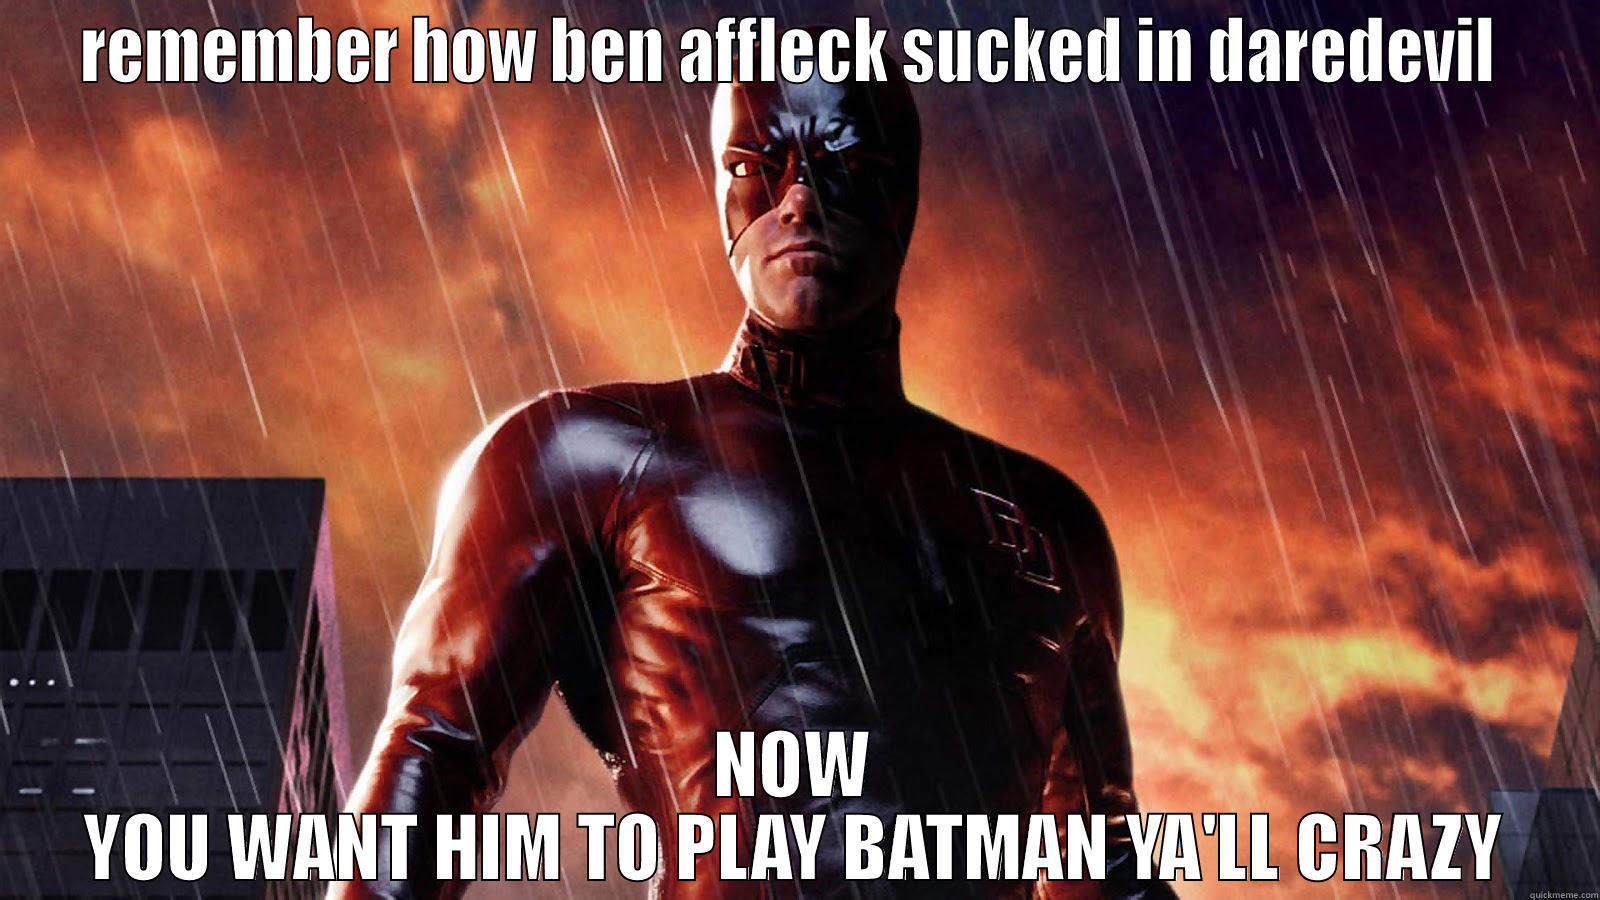 ben affleck ruiner of superheroes  - REMEMBER HOW BEN AFFLECK SUCKED IN DAREDEVIL  NOW YOU WANT HIM TO PLAY BATMAN YA'LL CRAZY Misc